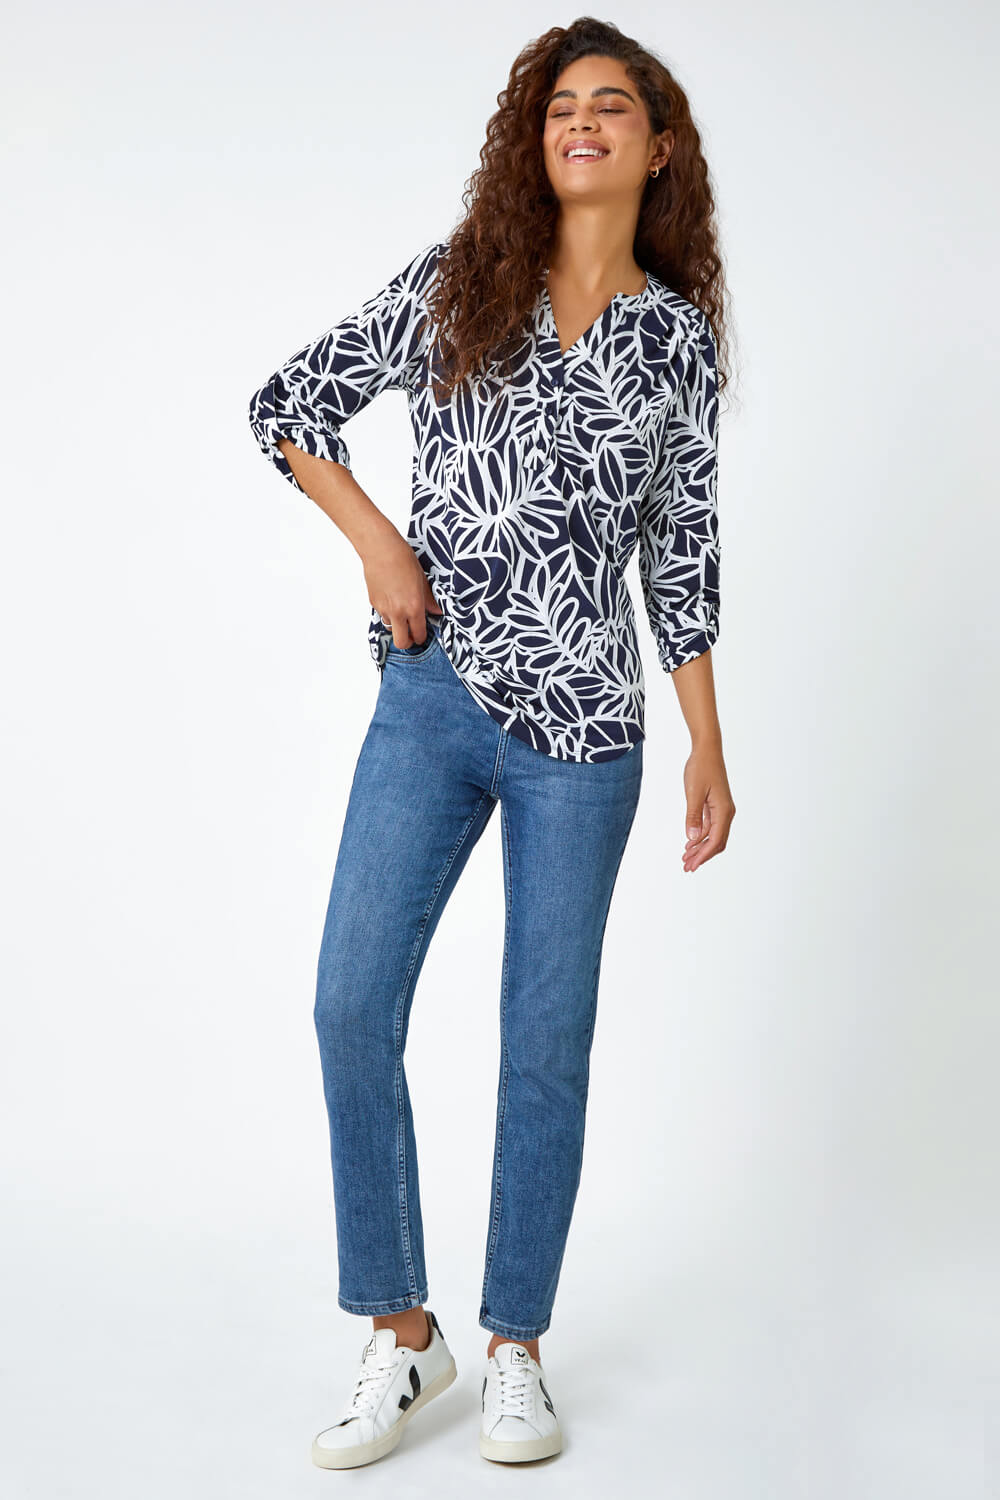 Navy  Textured Floral Print Stretch Top , Image 2 of 5